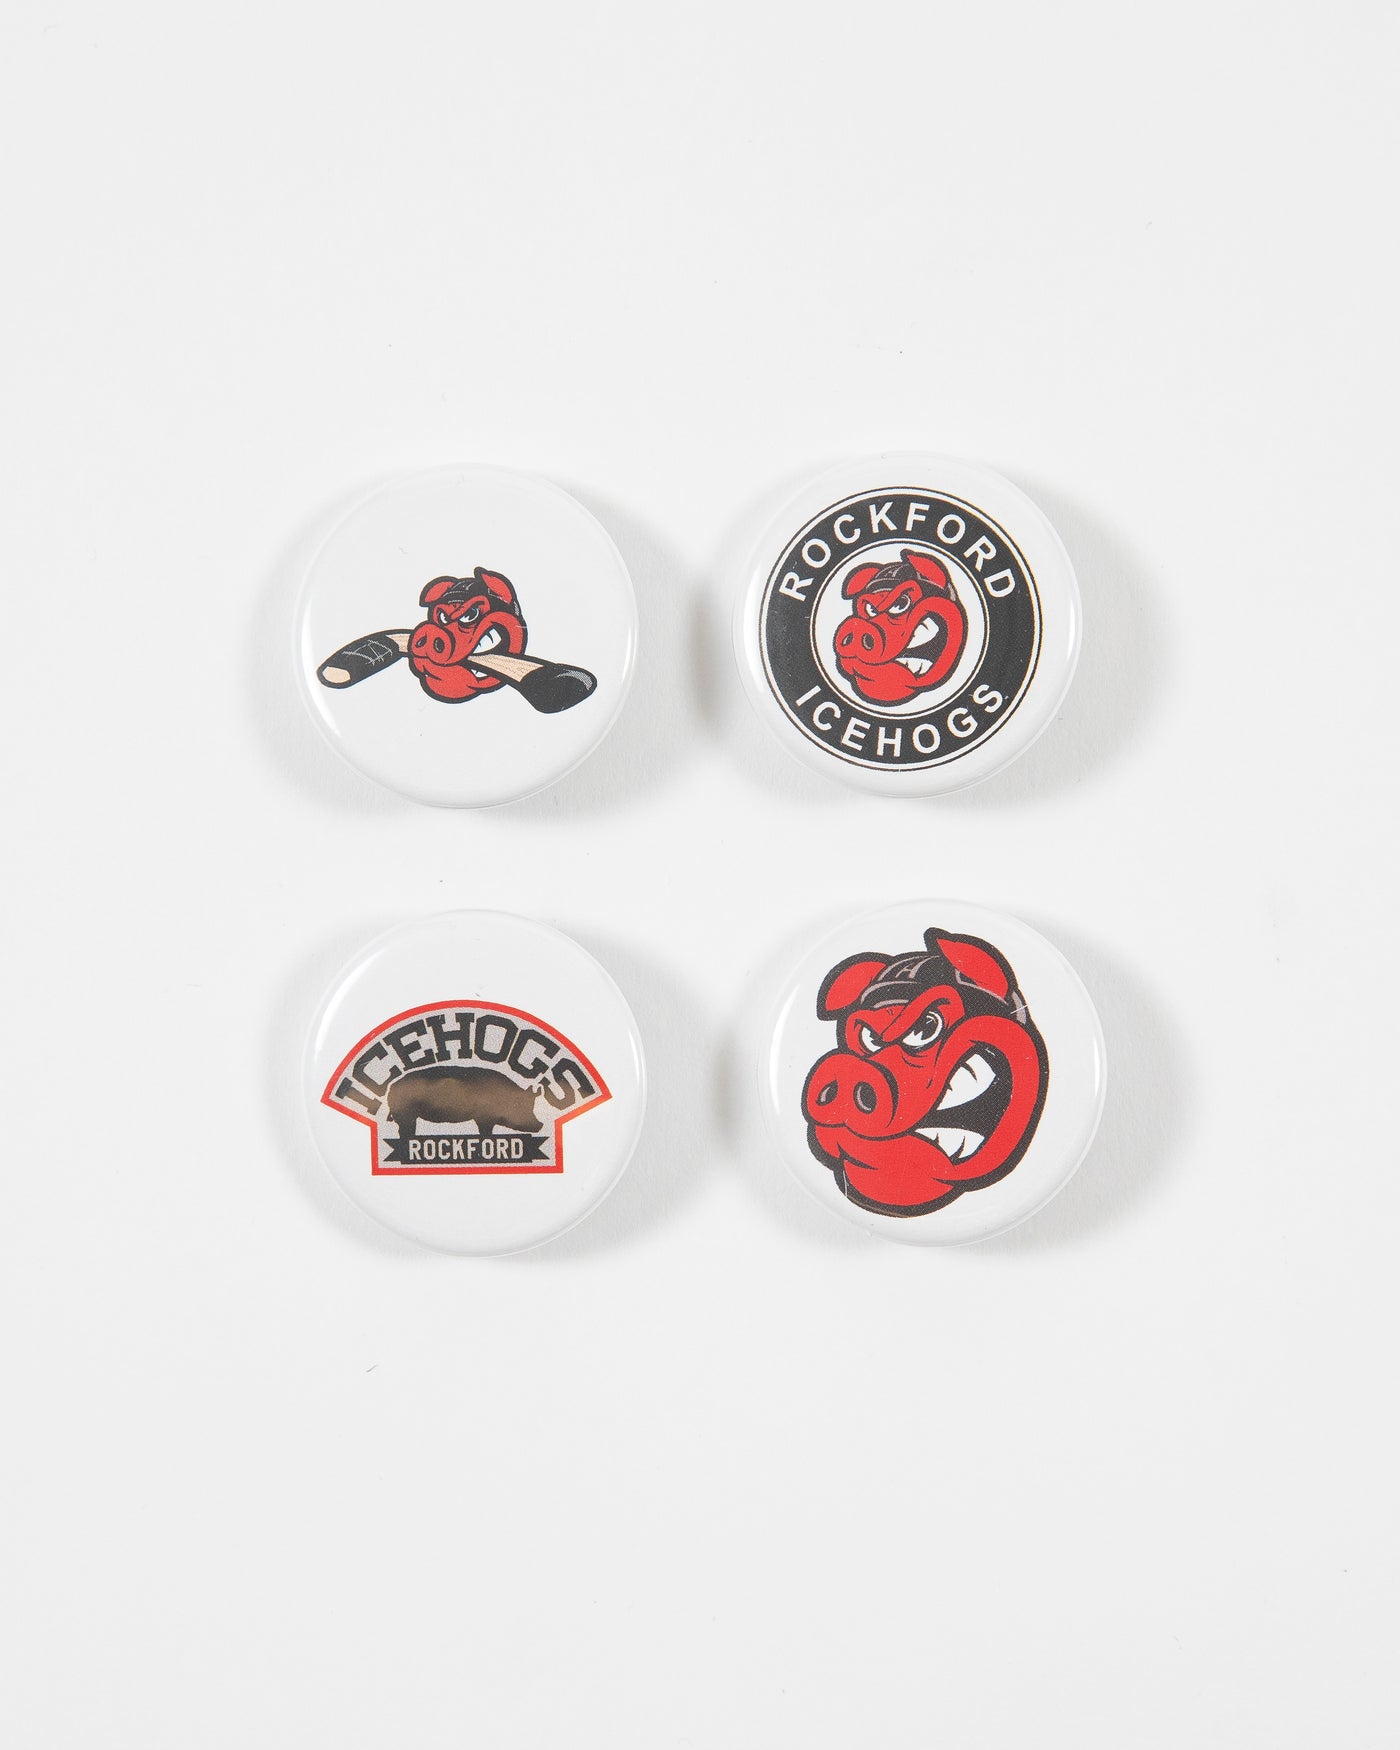 Rockford IceHogs four button pack with assorted graphics - front lay flat